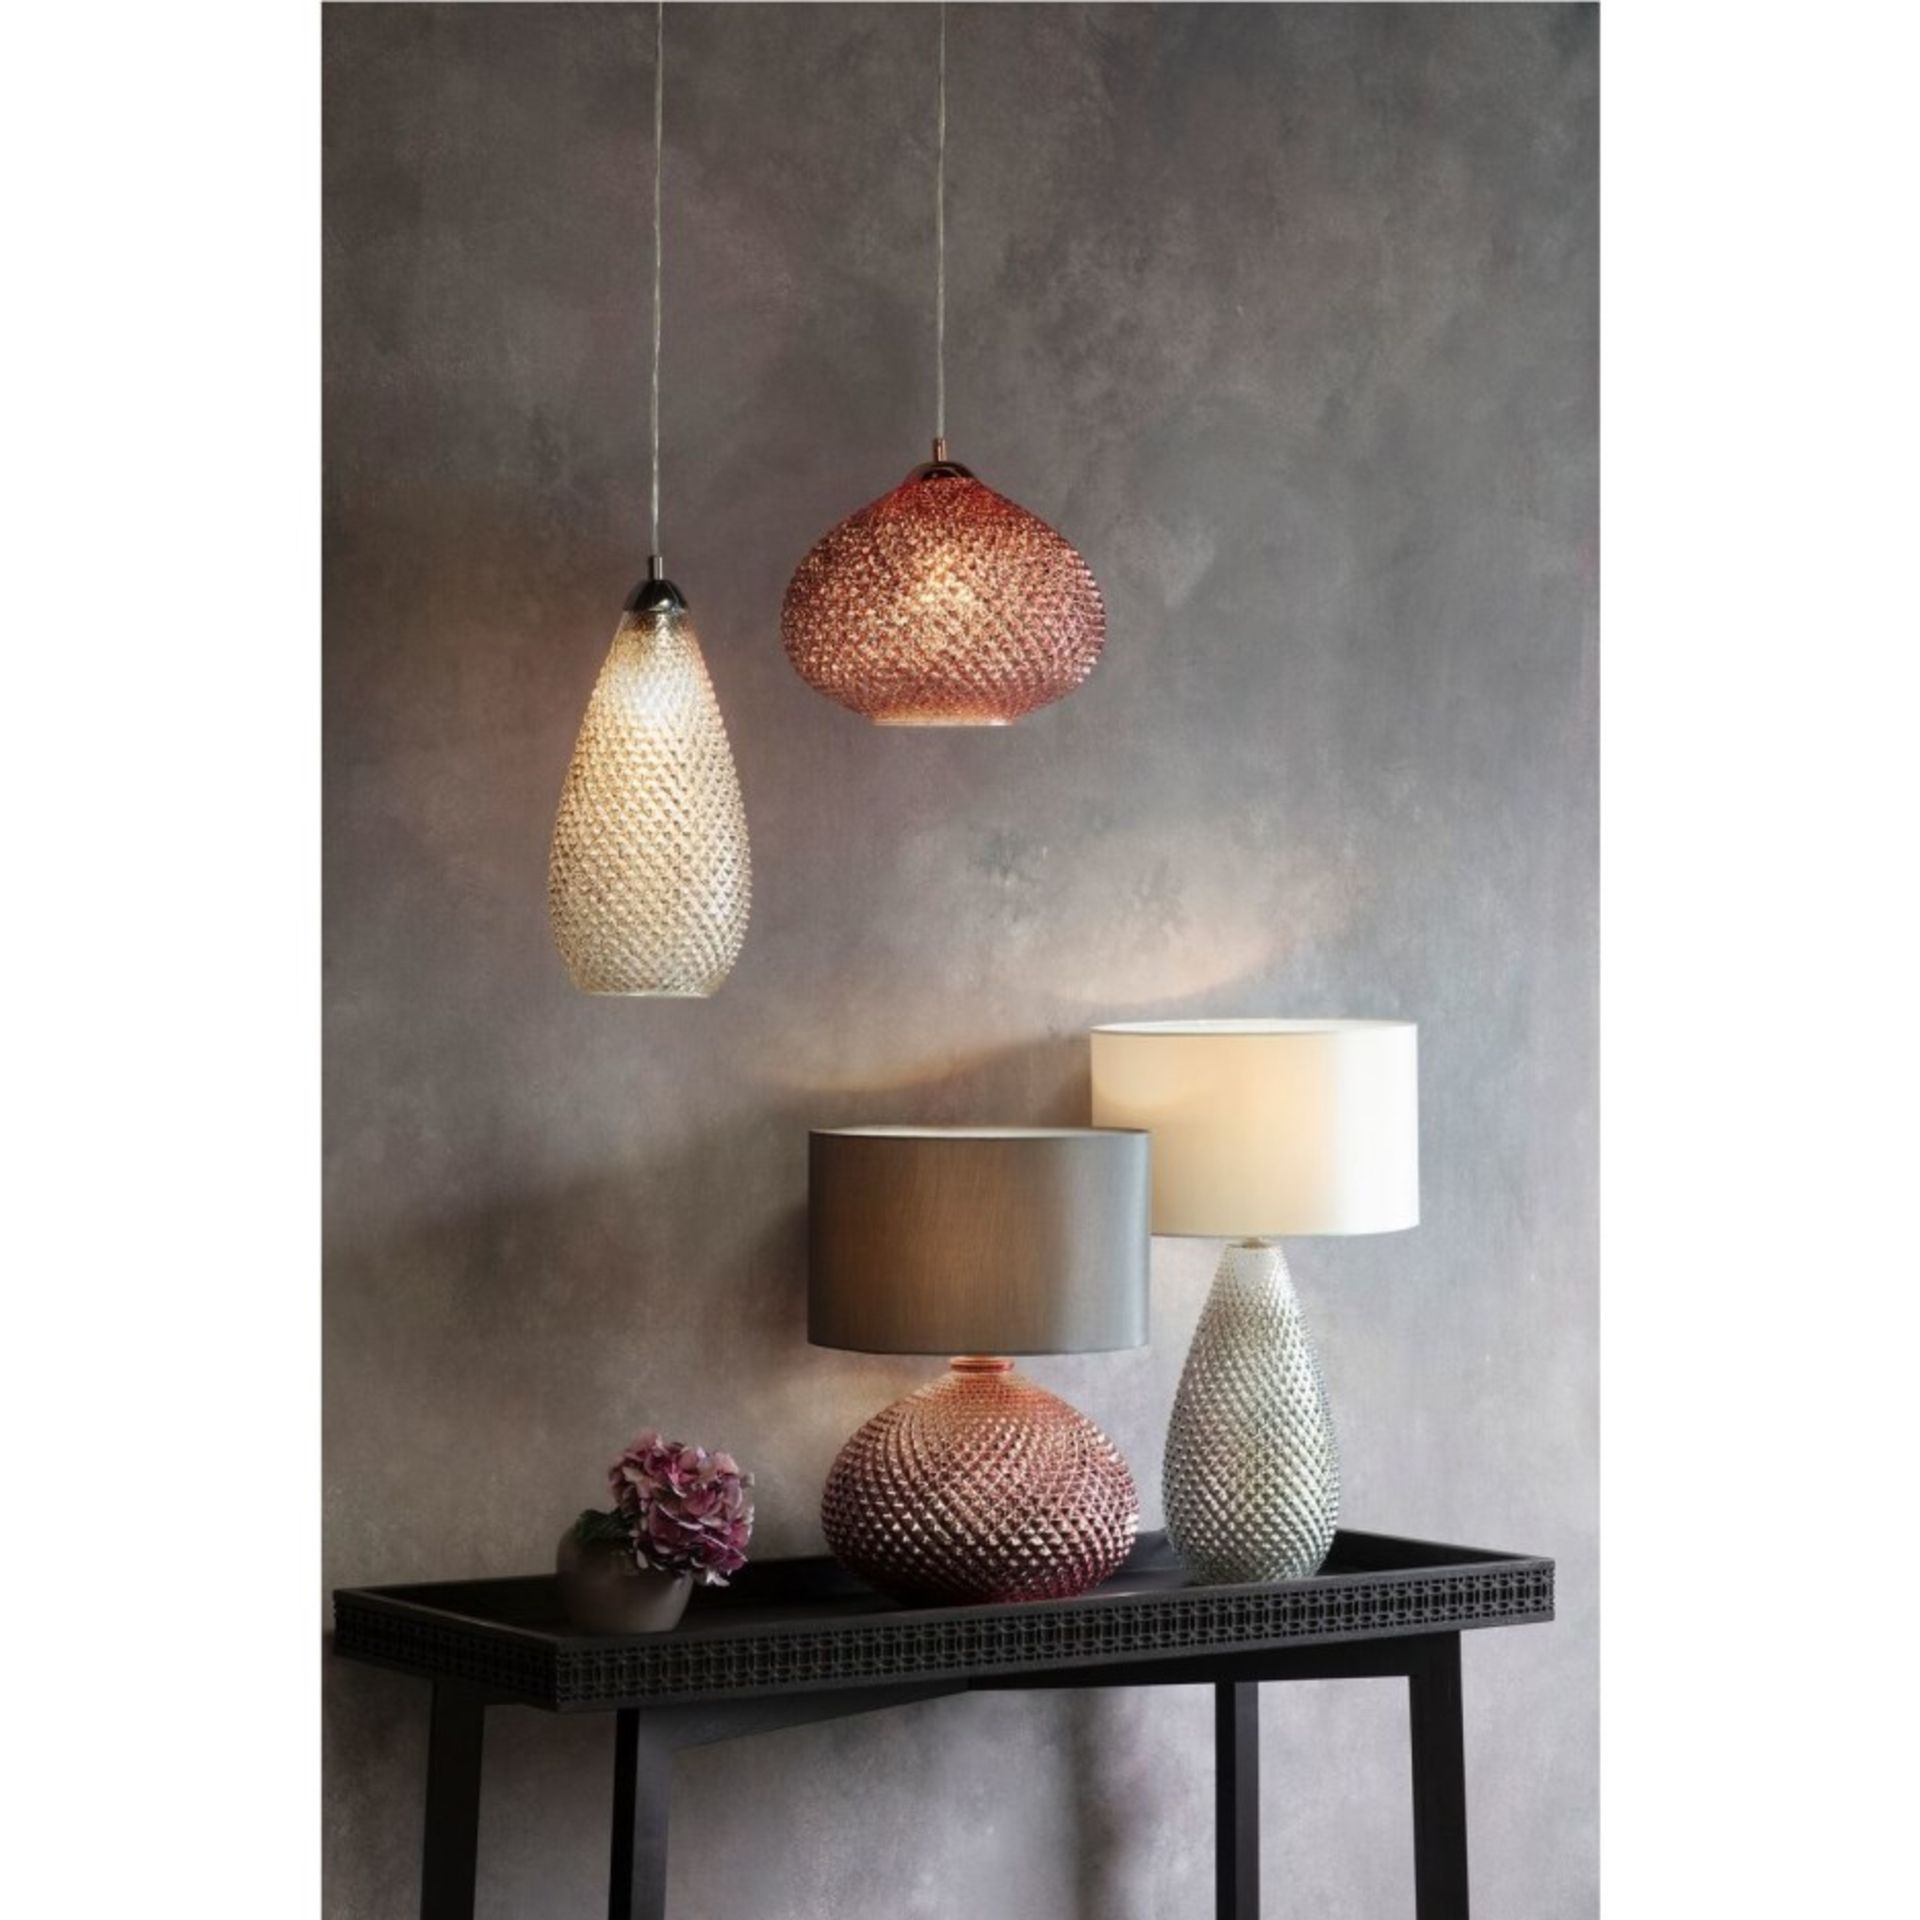 Livia Pendant Light Silver Mercury Highly decorative copper and or chrome plated 'mercury' glass